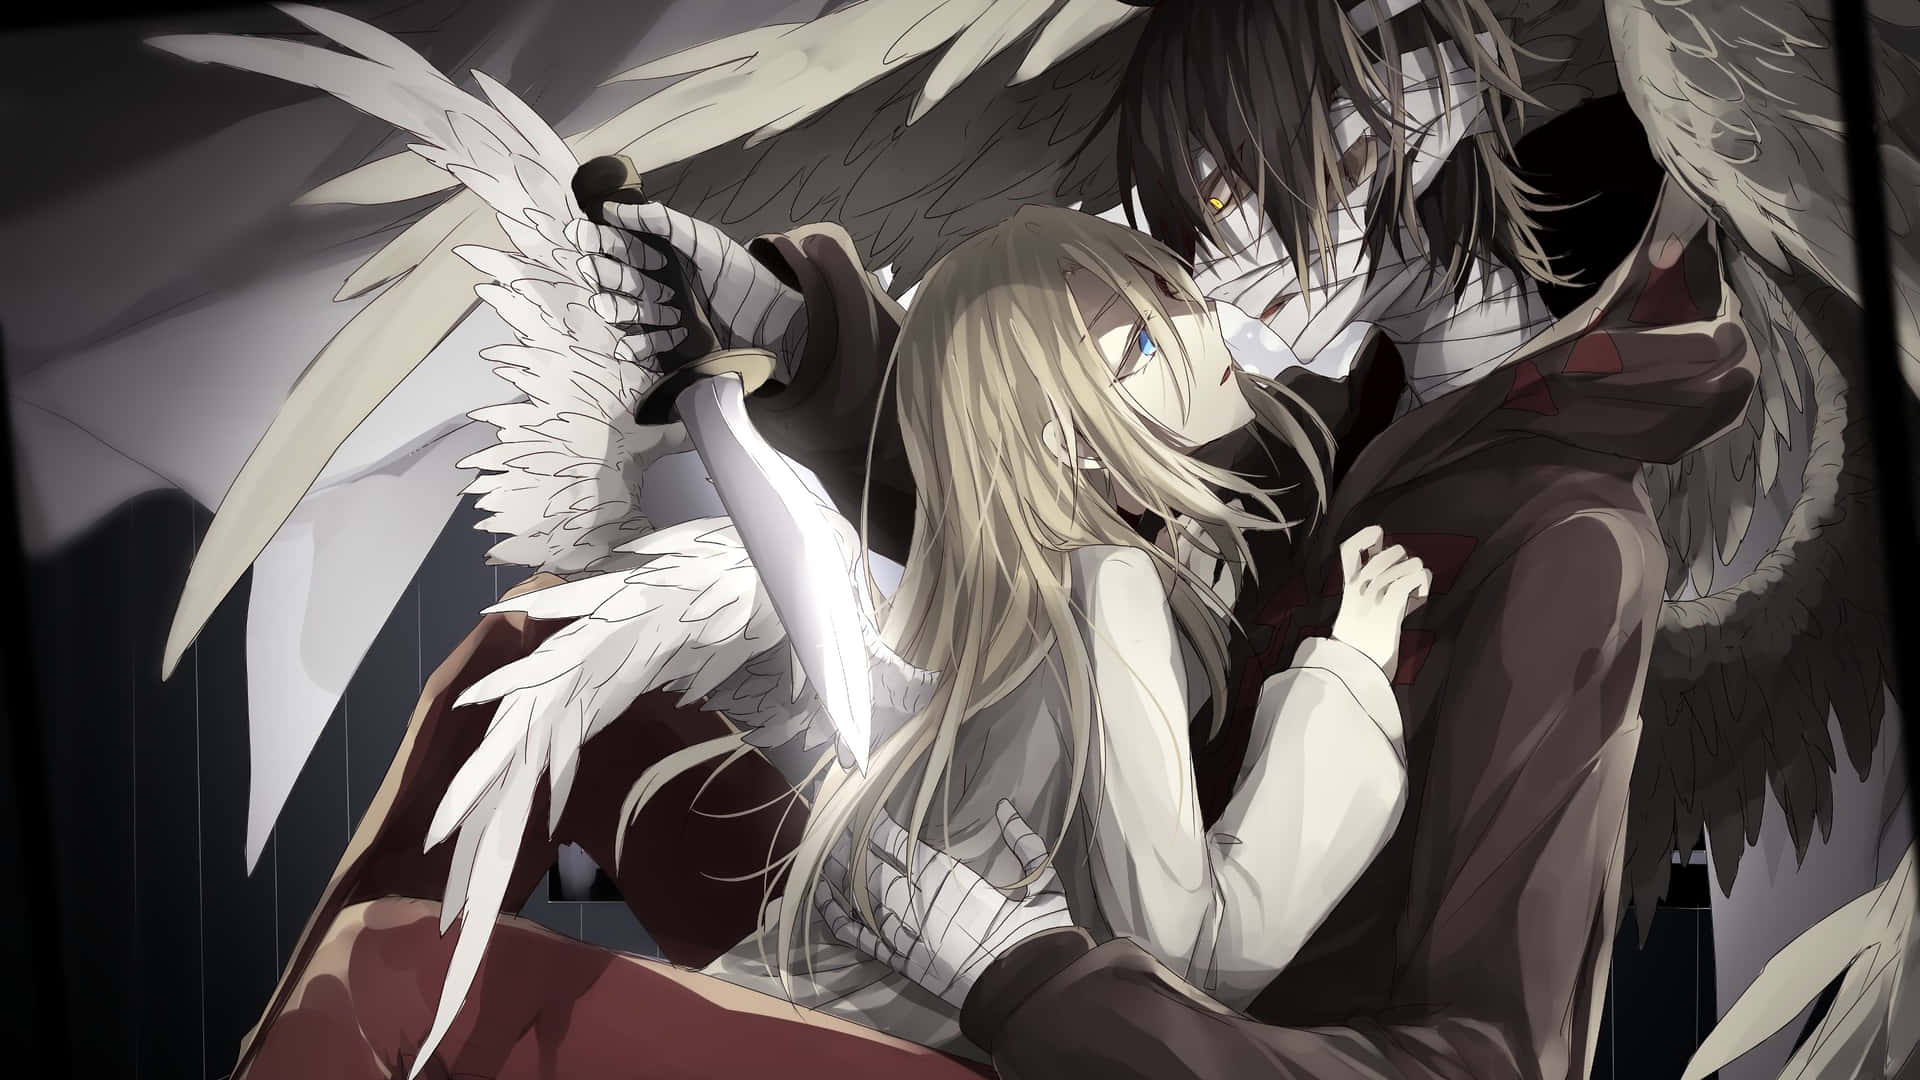 Download Anime fans rejoice - Angels Of Death is here!